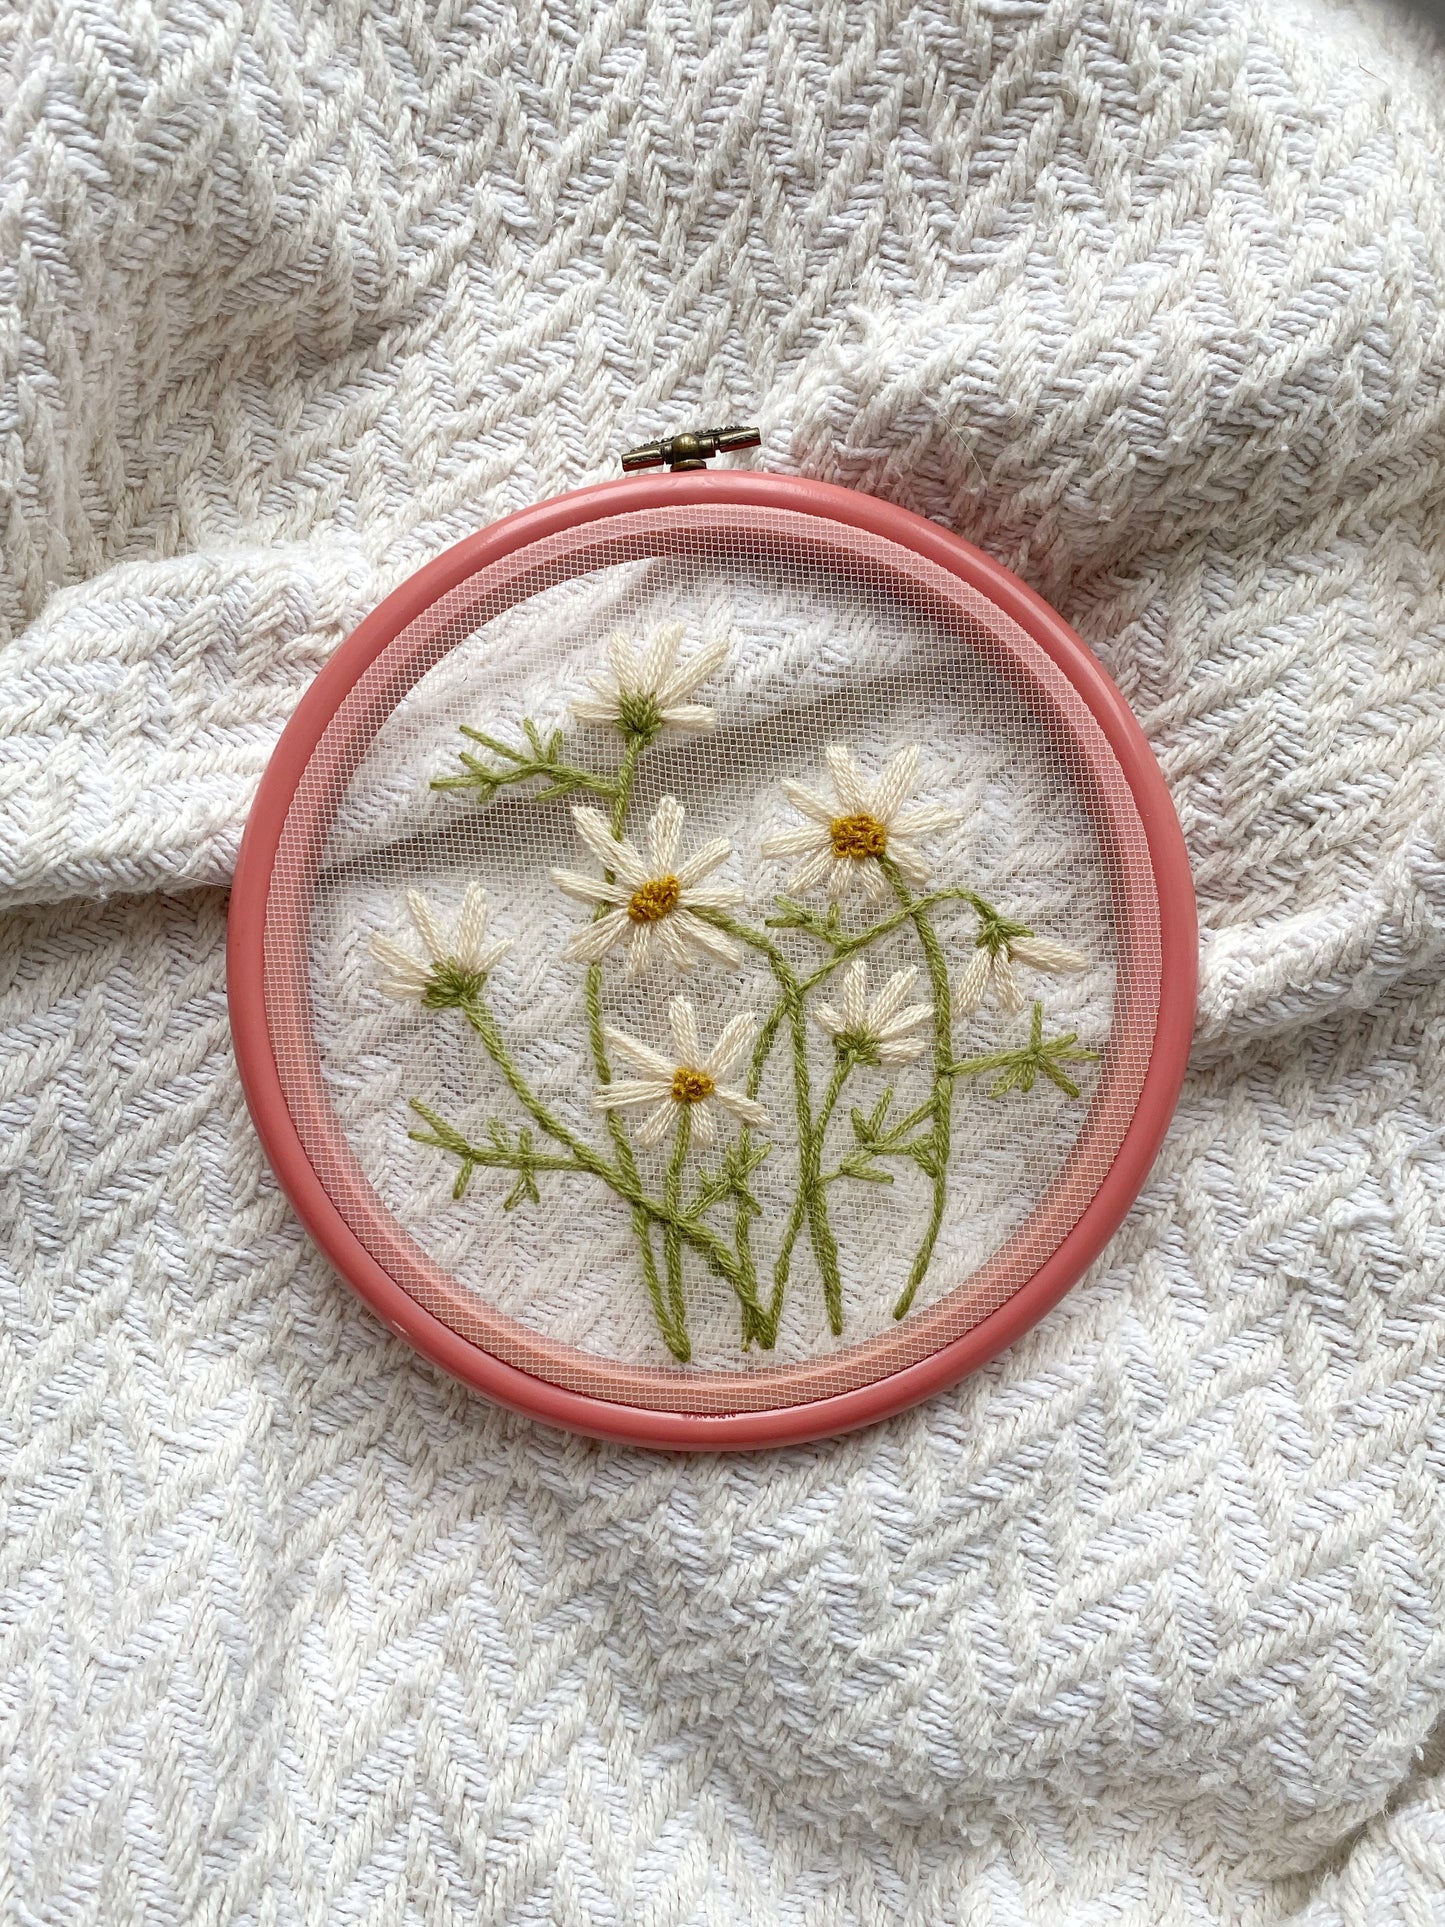 Daisy Fields || Ready-to-Ship Original Embroidery Hoop Art on Tulle Fabric